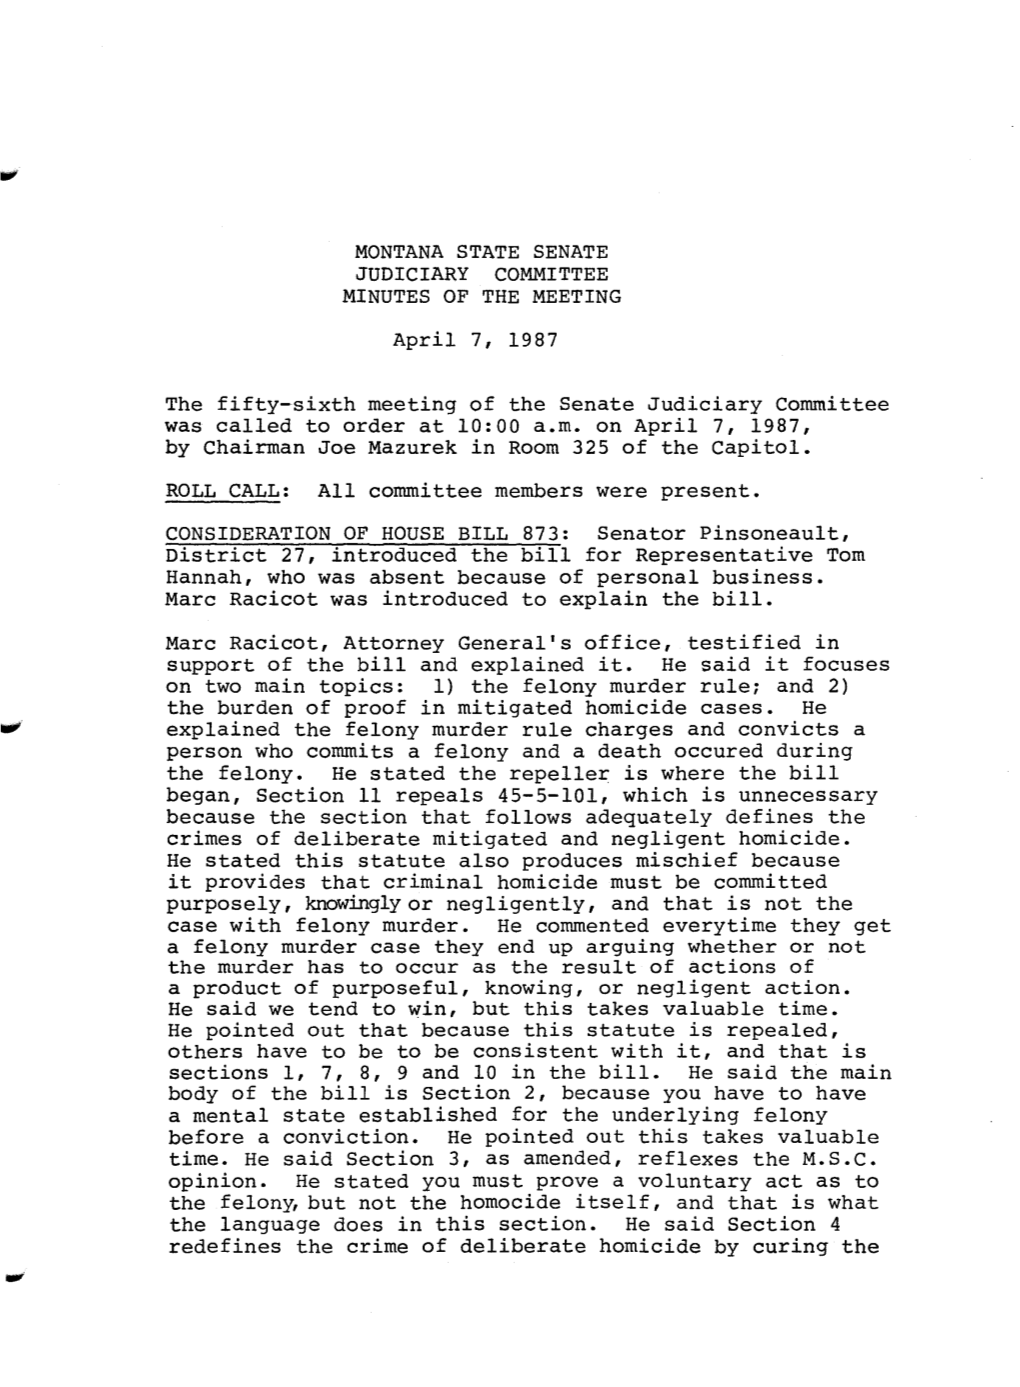 MONTANA STATE SENATE JUDICIARY COMMITTEE MINUTES of the MEETING April 7, 1987 the Fifty-Sixth Meeting of the Senate Judiciary Co